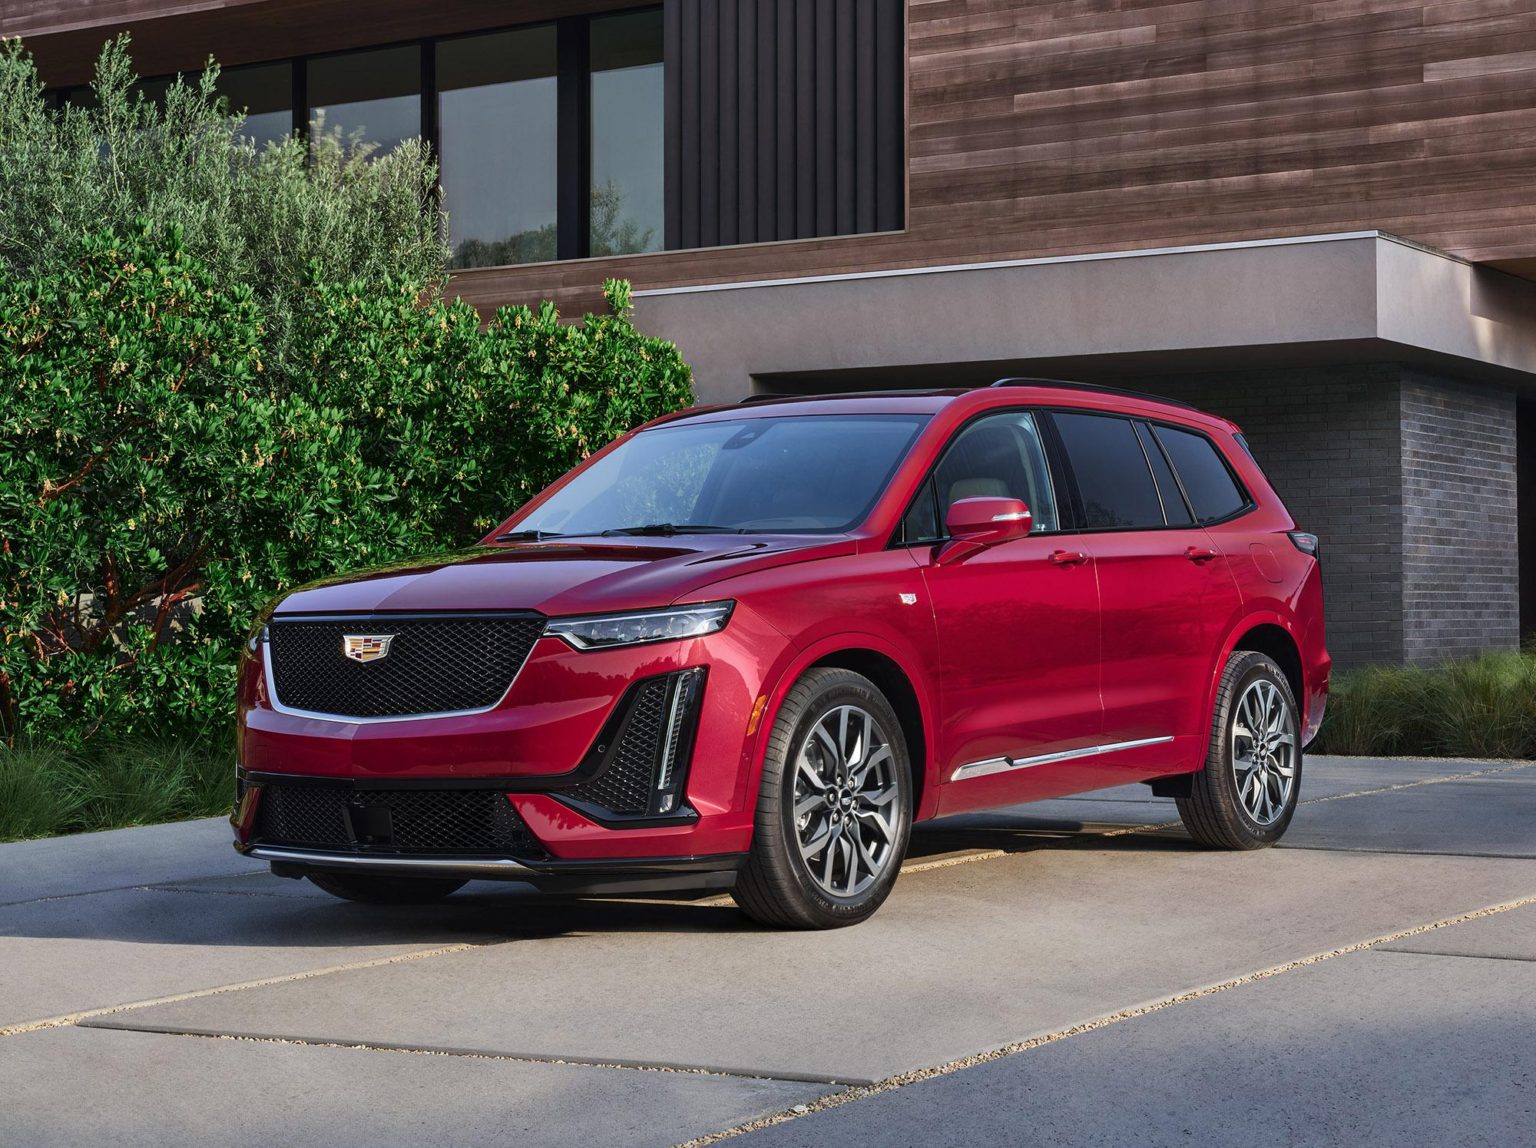 The 2021 Cadillac XT6 has familiar familial design attributes, inside and out.